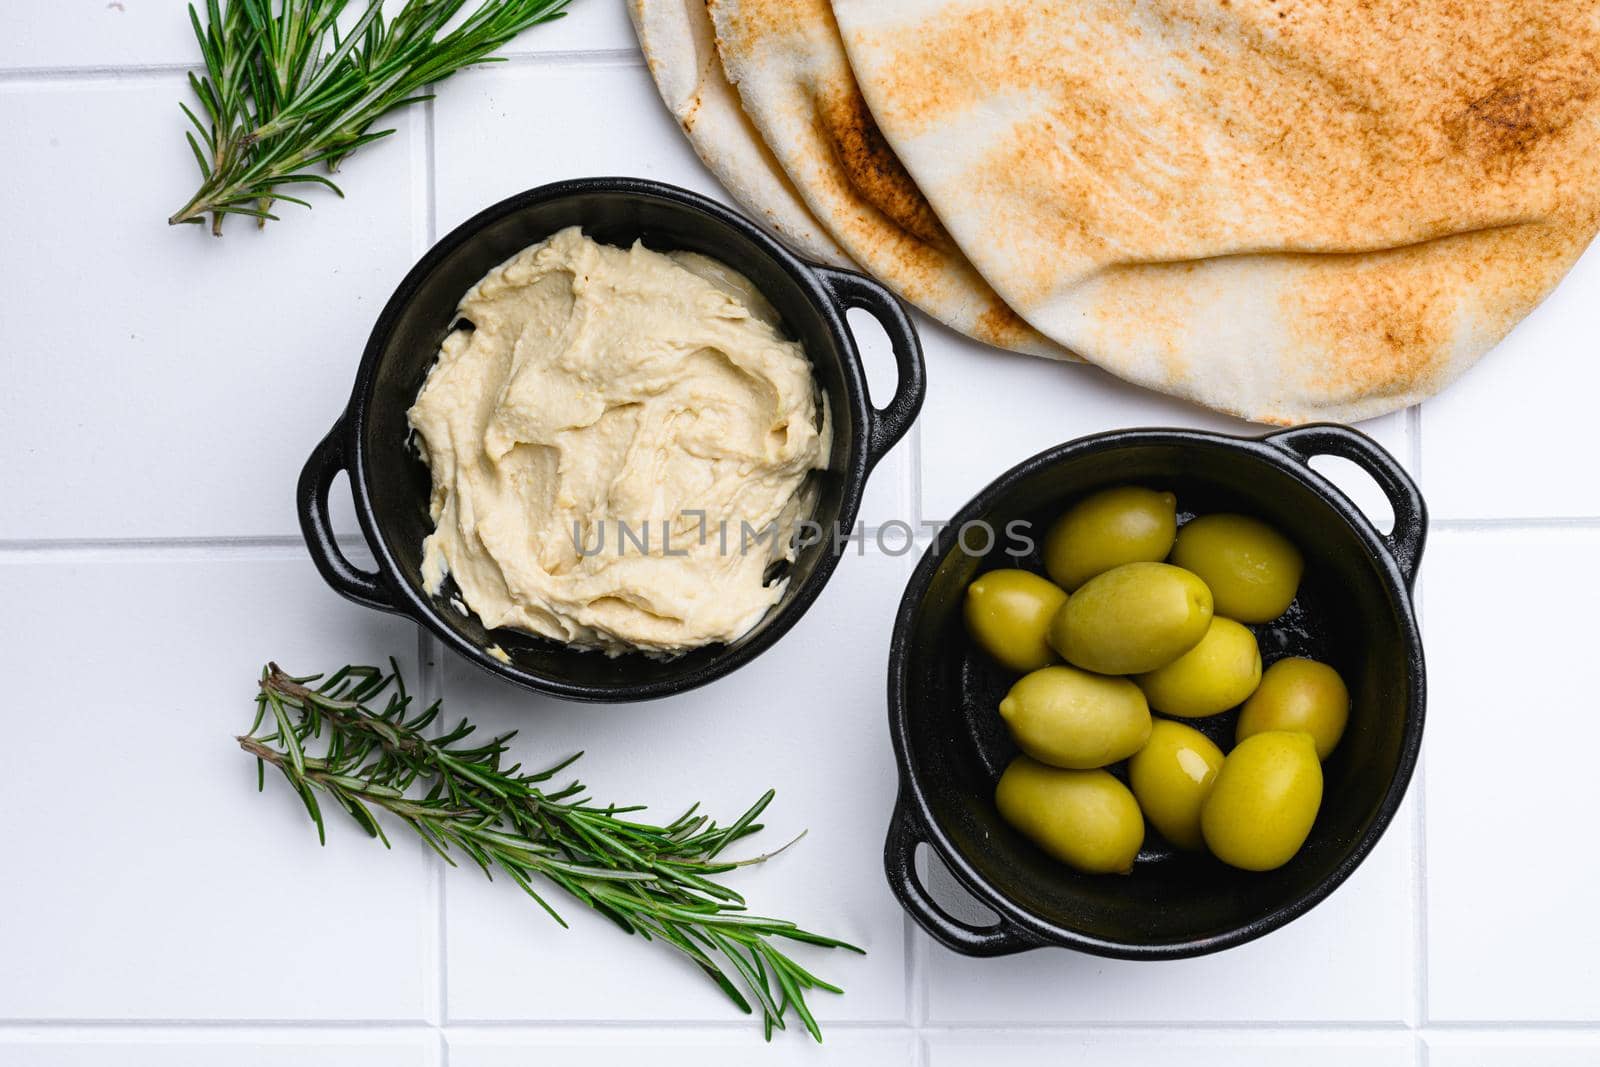 Hummus and wheat flatbread set, on white ceramic squared tile table background, top view flat lay by Ilianesolenyi